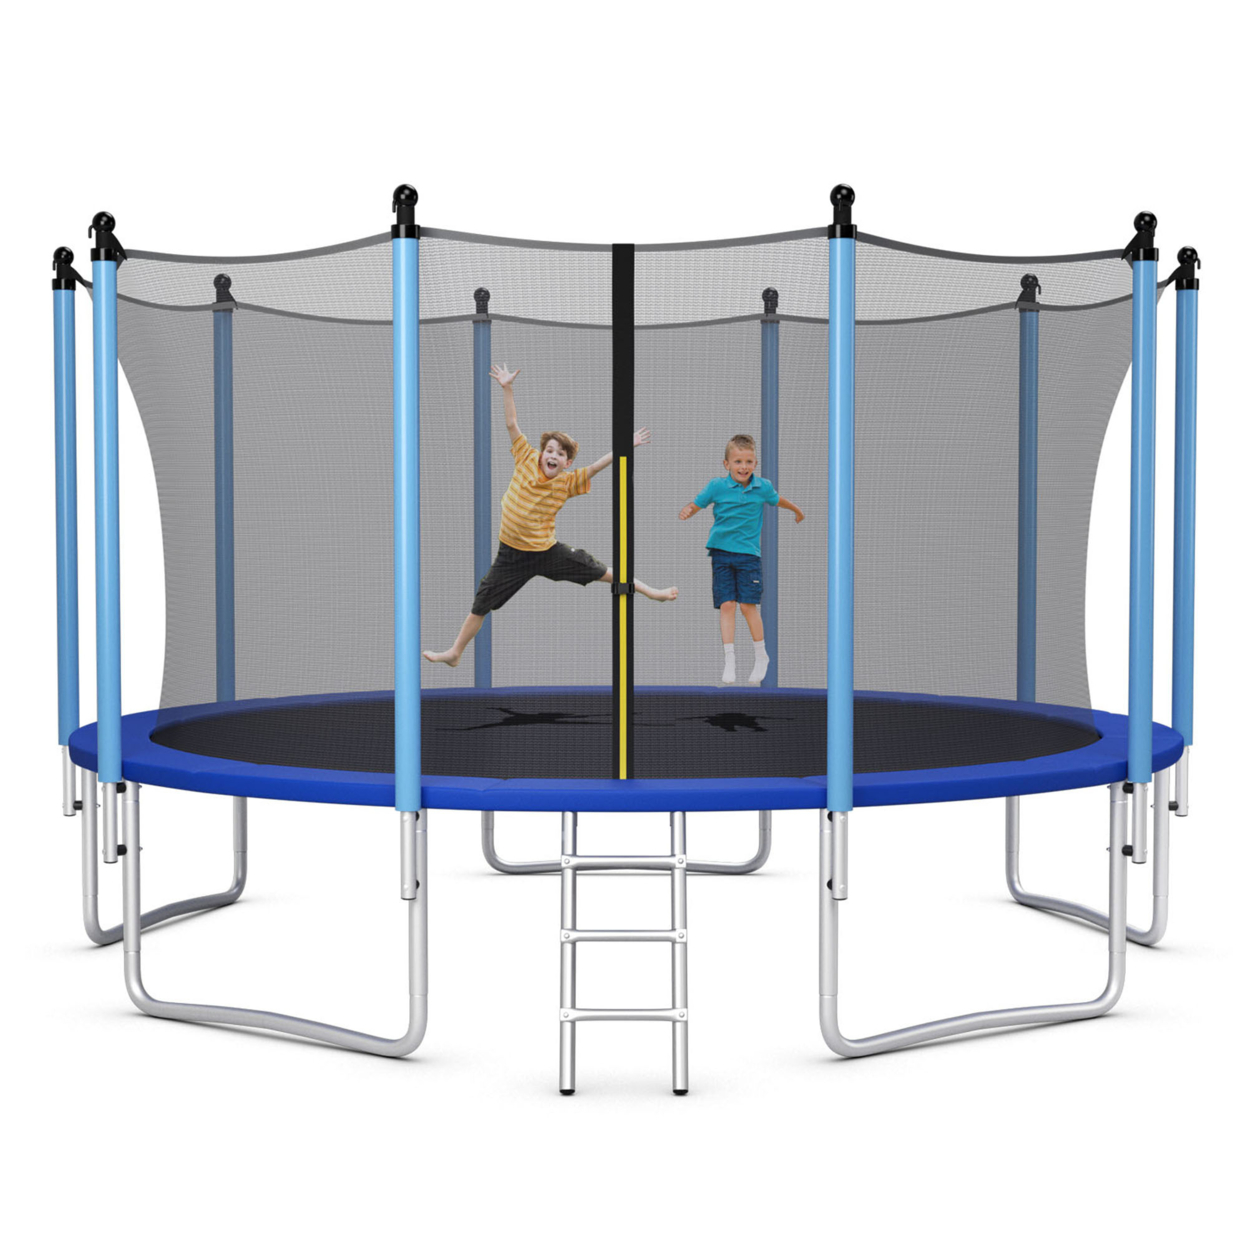 8/10/12/14/15/16FT Jumping Exercise Recreational Bounce Trampoline For Kids W/Safety Enclosure - 12 Ft